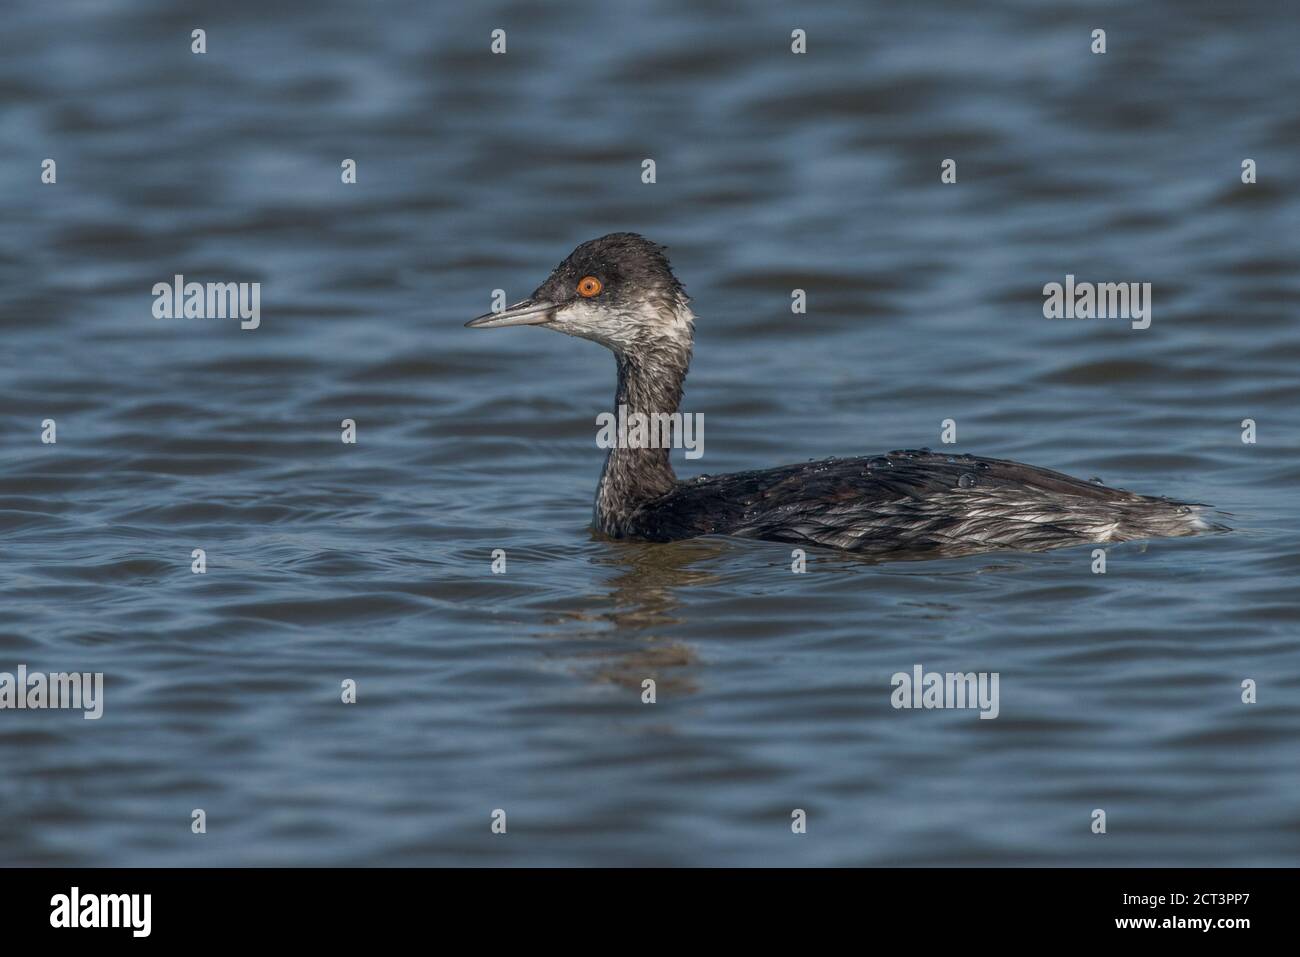 An eared grebe (Podiceps nigricollis) from the Don Edwards San Francisco Bay National Wildlife refuge. Stock Photo